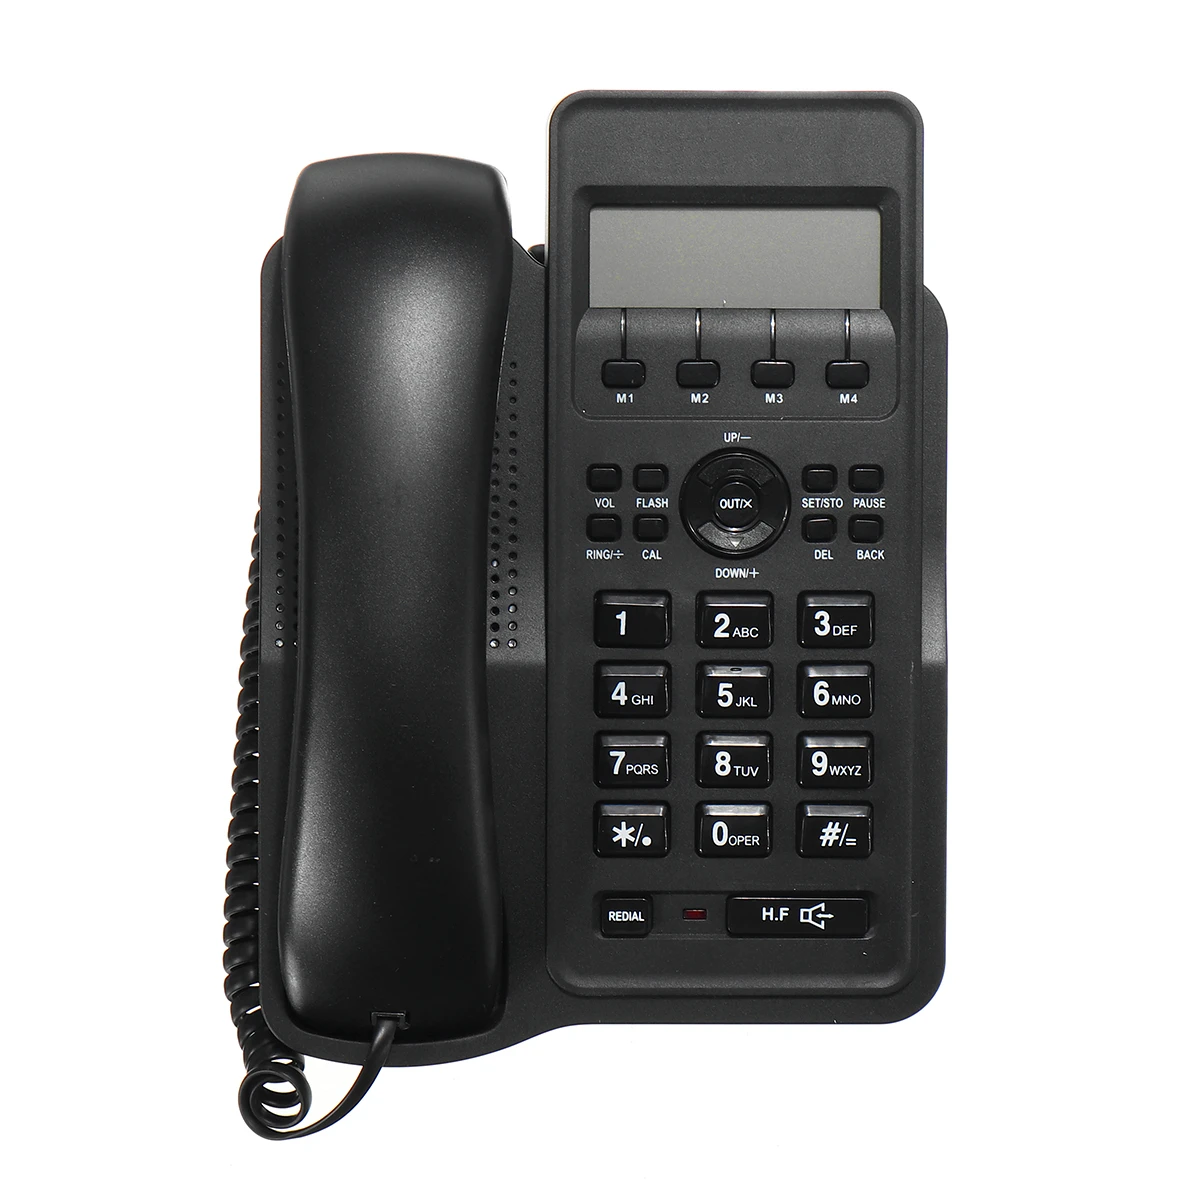 Find kX 7712 Telephone LCD Screen Caller Home Hotel Office Caller Landline Feature Phone for Sale on Gipsybee.com